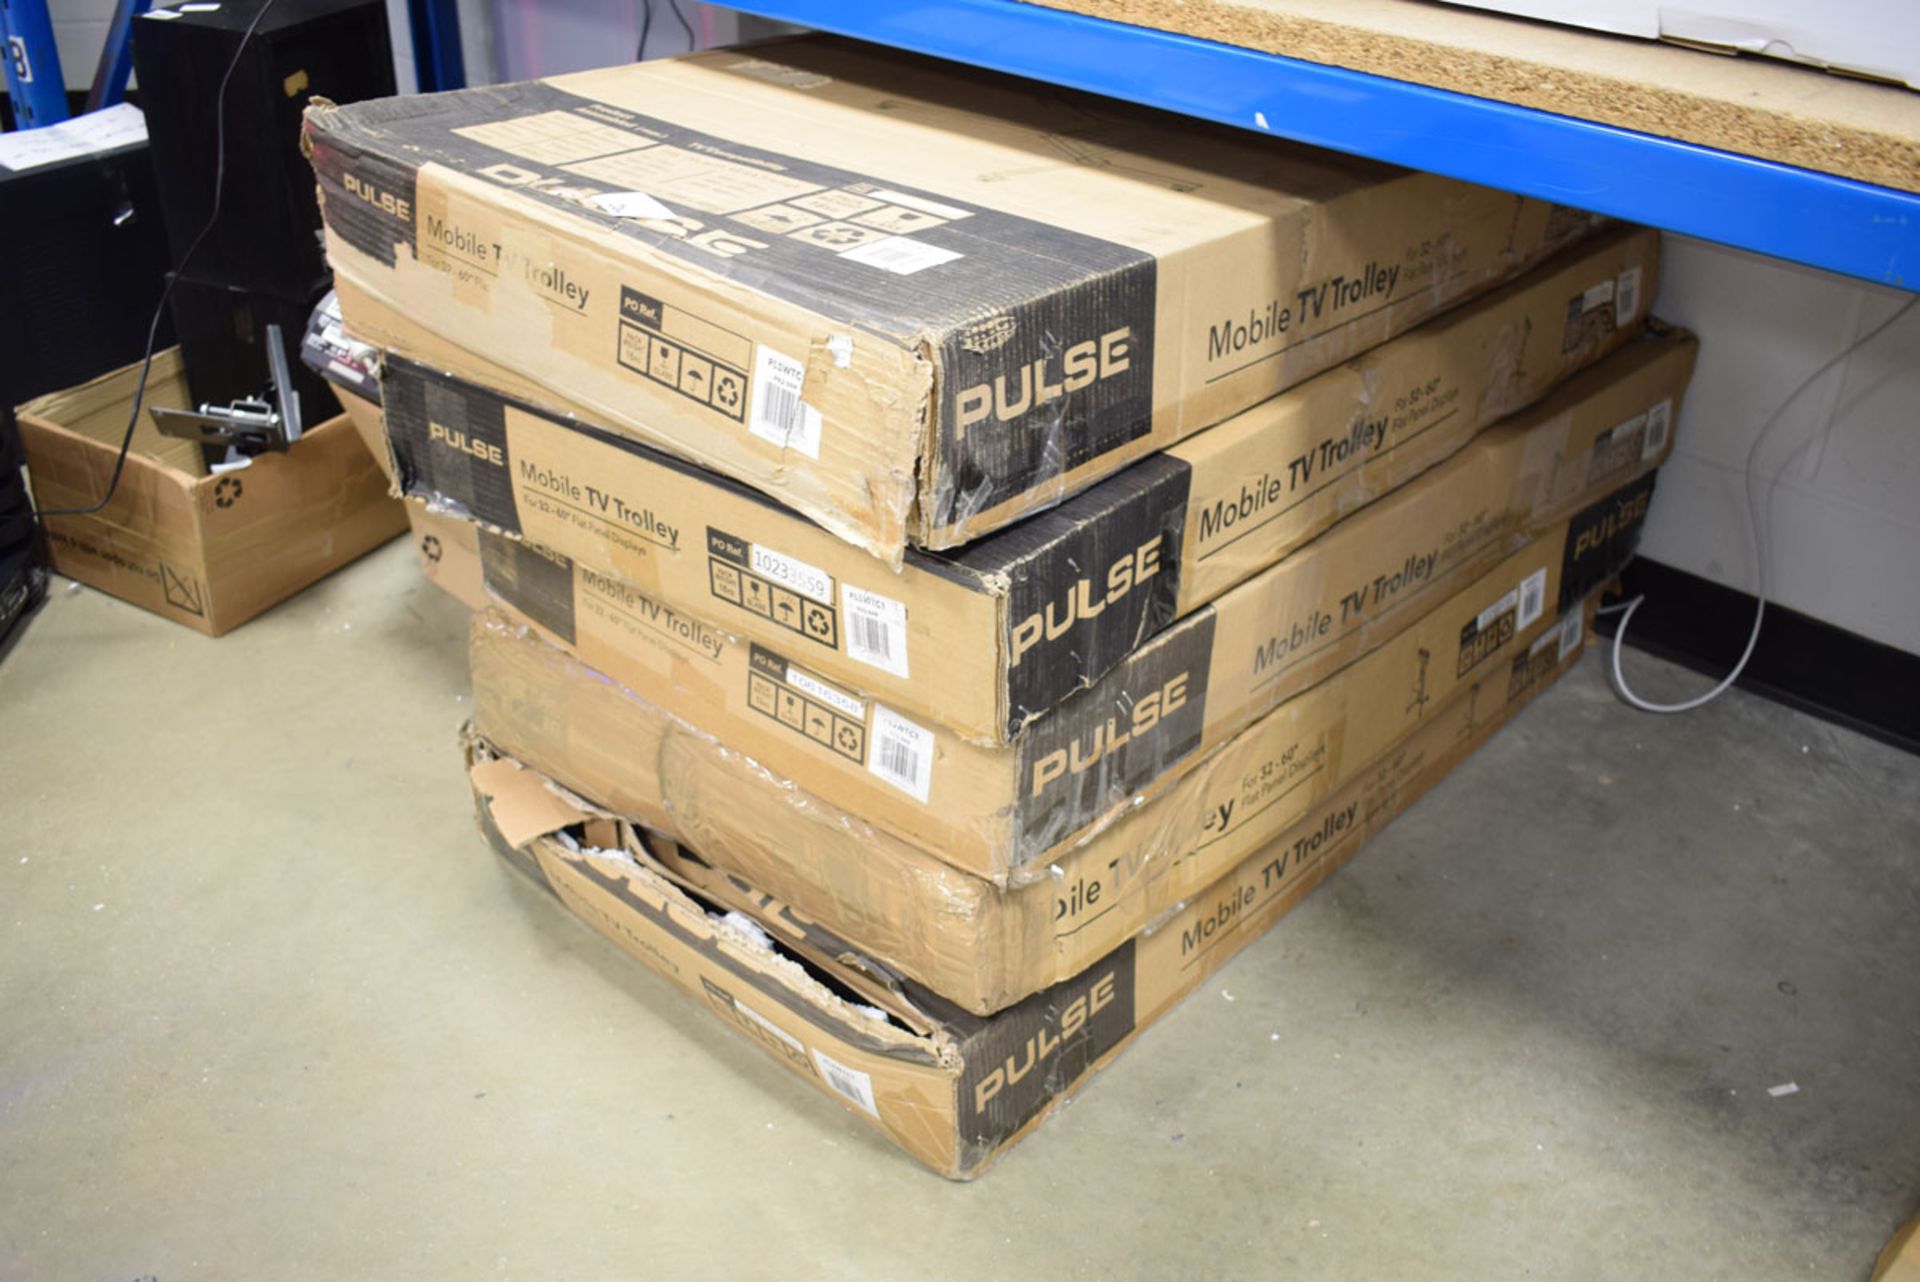 5 Pulse mobile TV trolleys in boxes for 32060'' flat panel displays